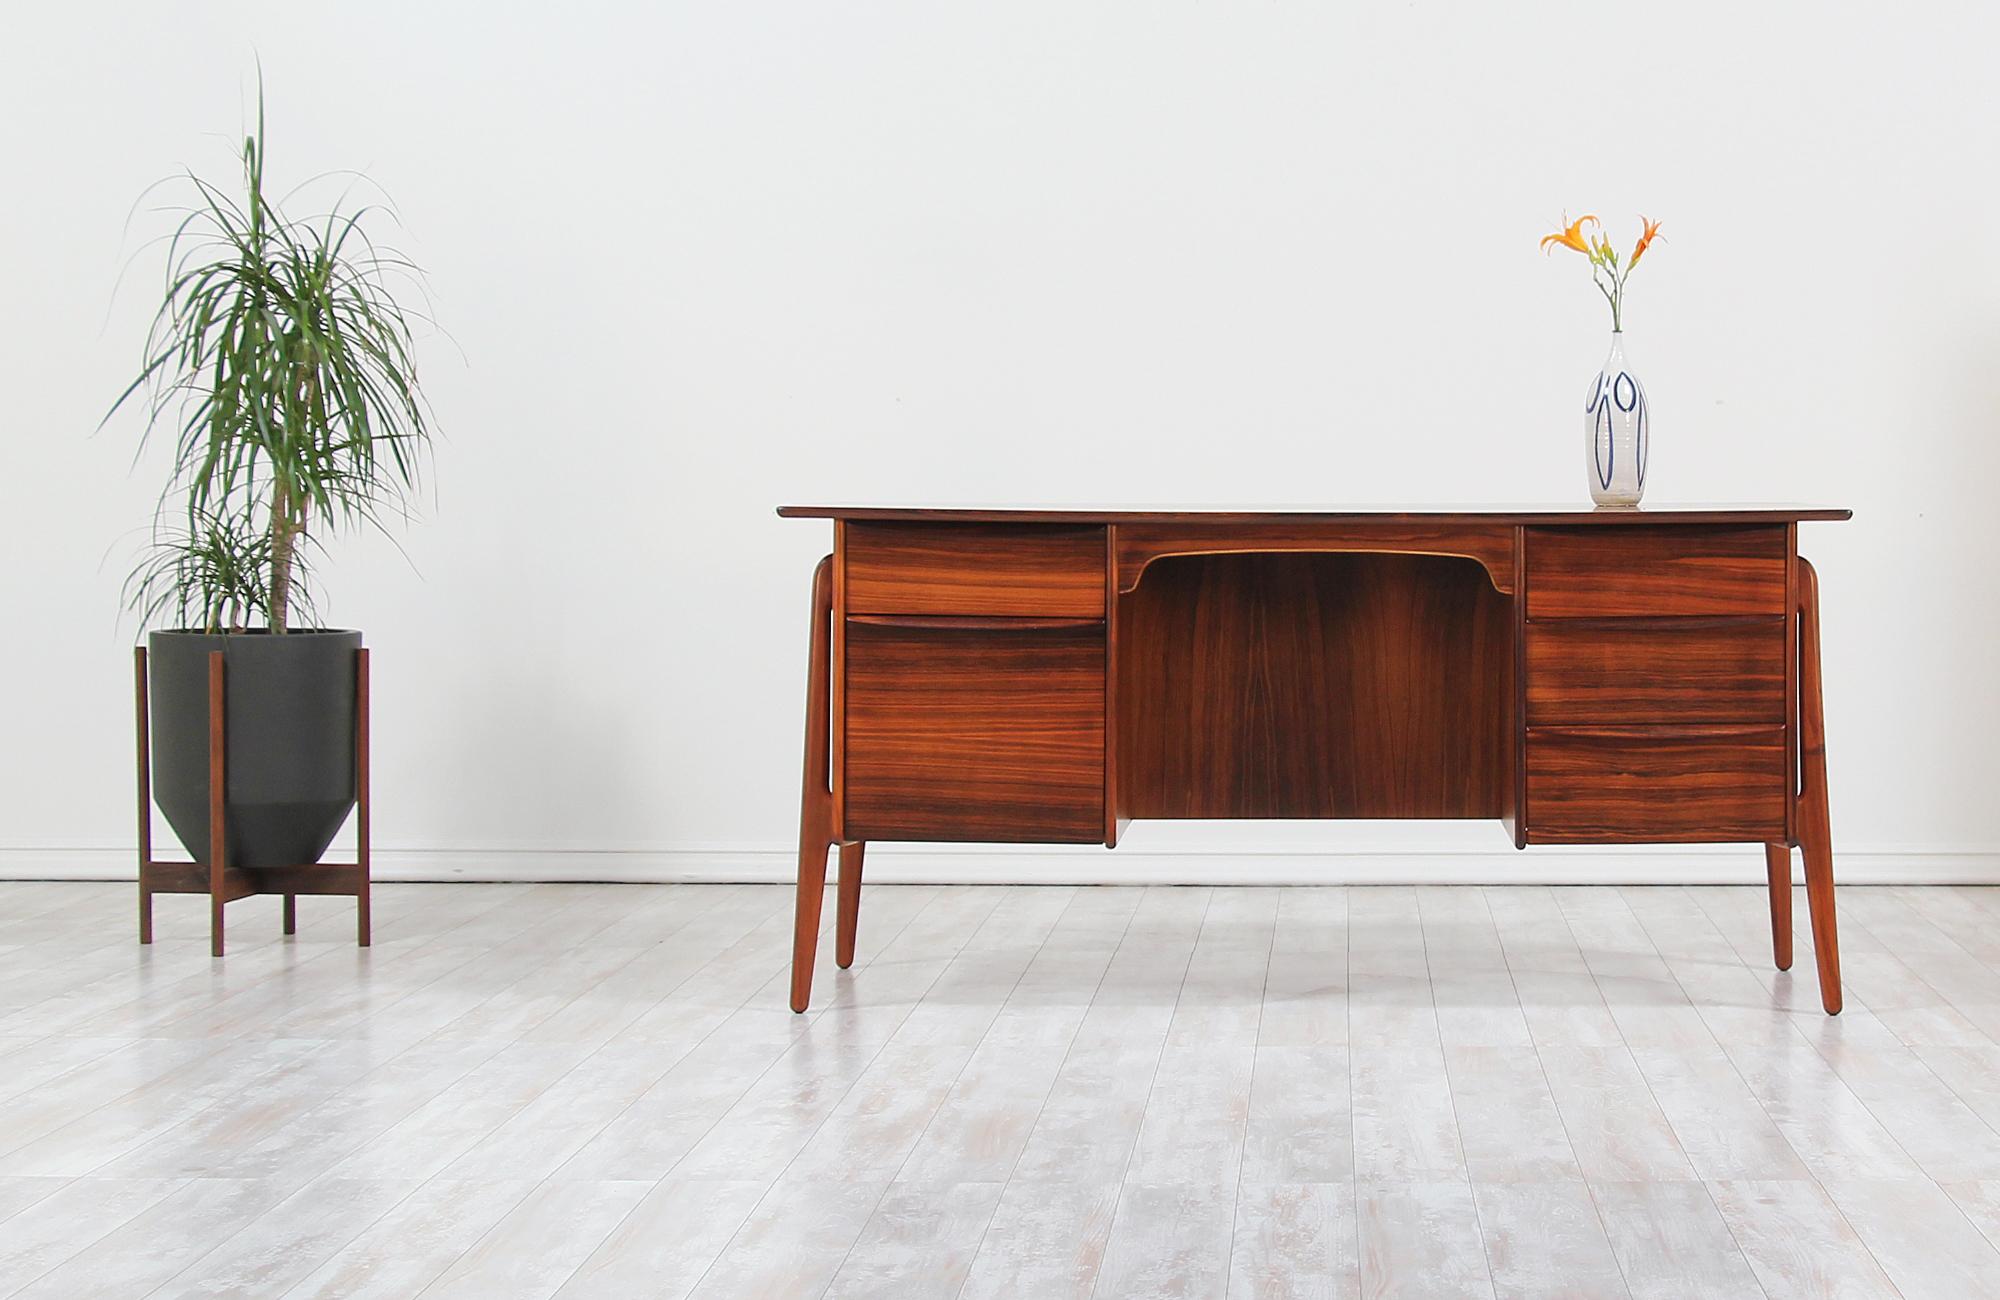 Versatile Danish modern executive desk designed by Svend A. Madsen for Sigurd Hansen in Denmark, circa 1950s. This Classic and elegant Danish desk features a sturdy Brazilian rosewood frame with a stunning grain detail throughout and four sculpted